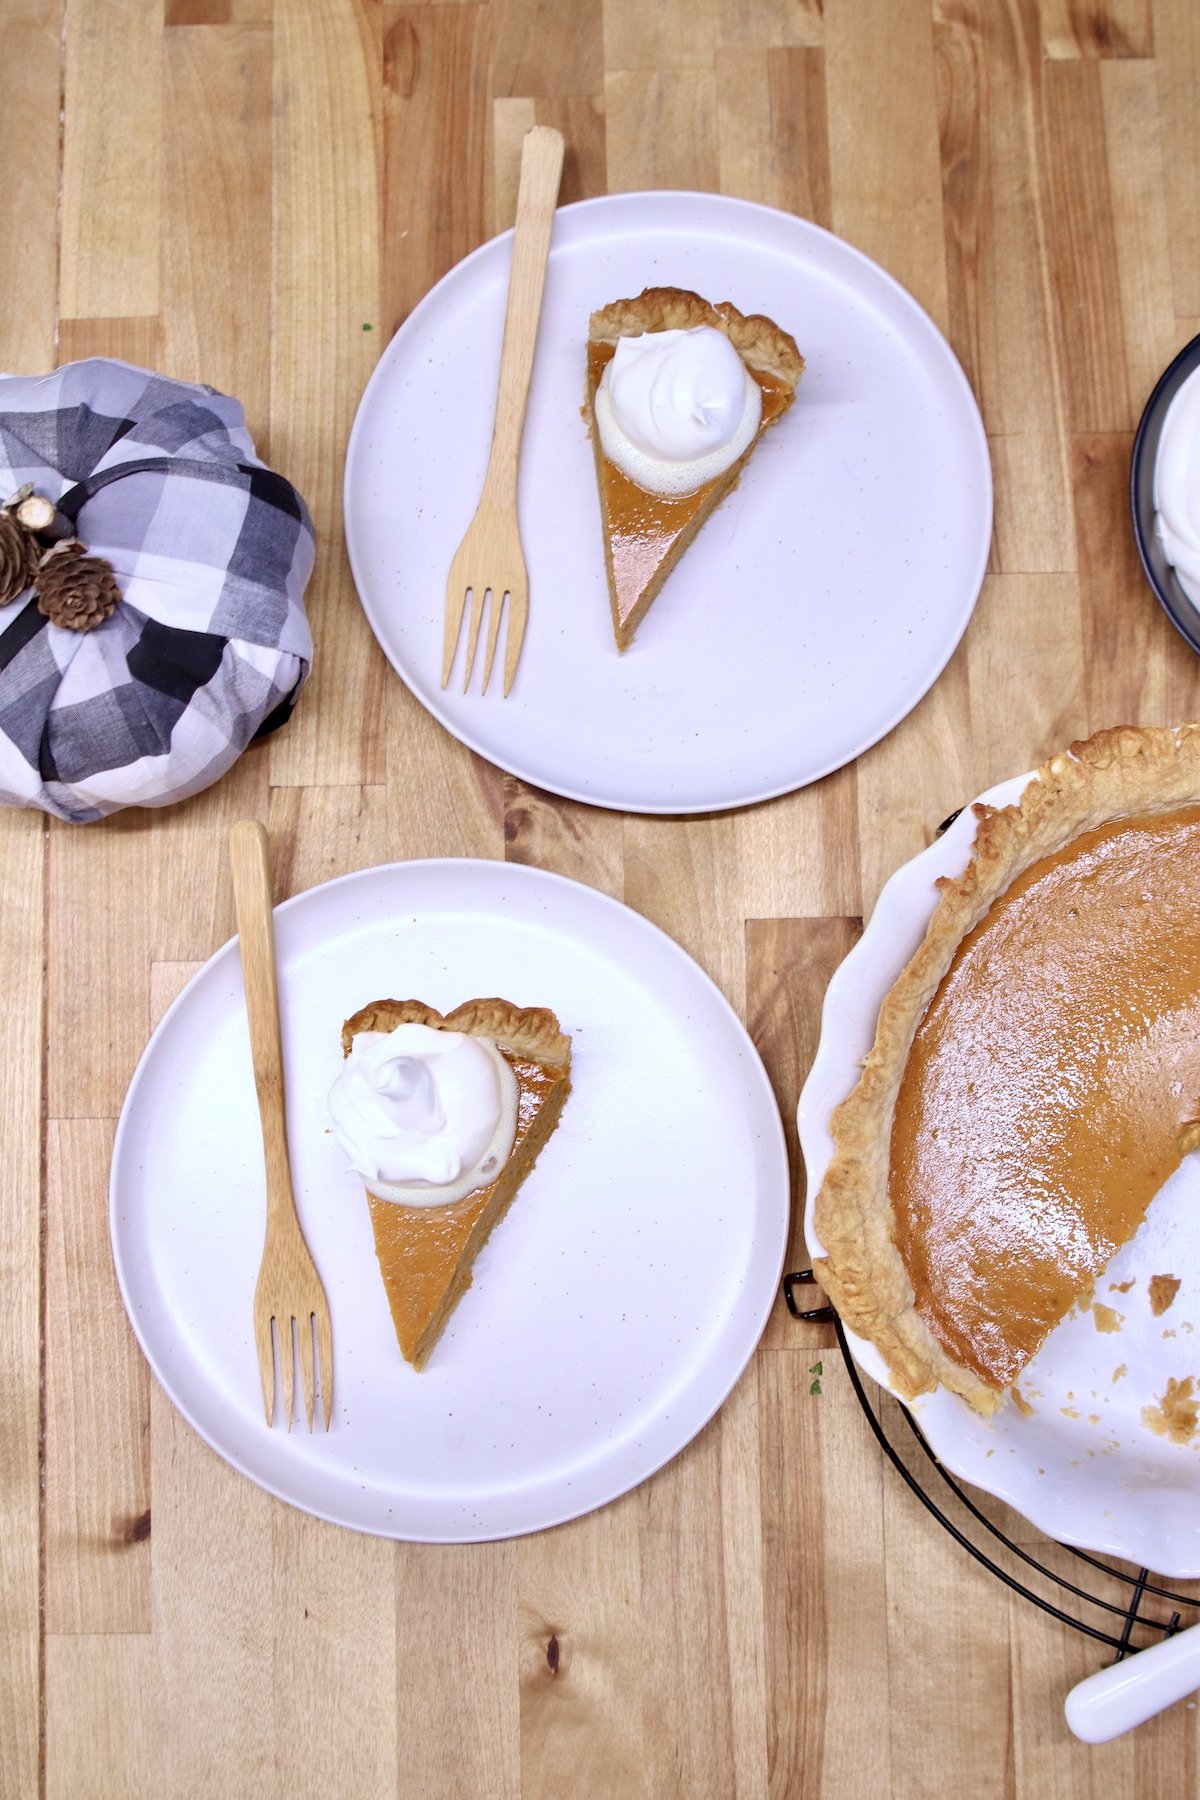 2 plates of pumpkin pie slices with cool whip - overhead view